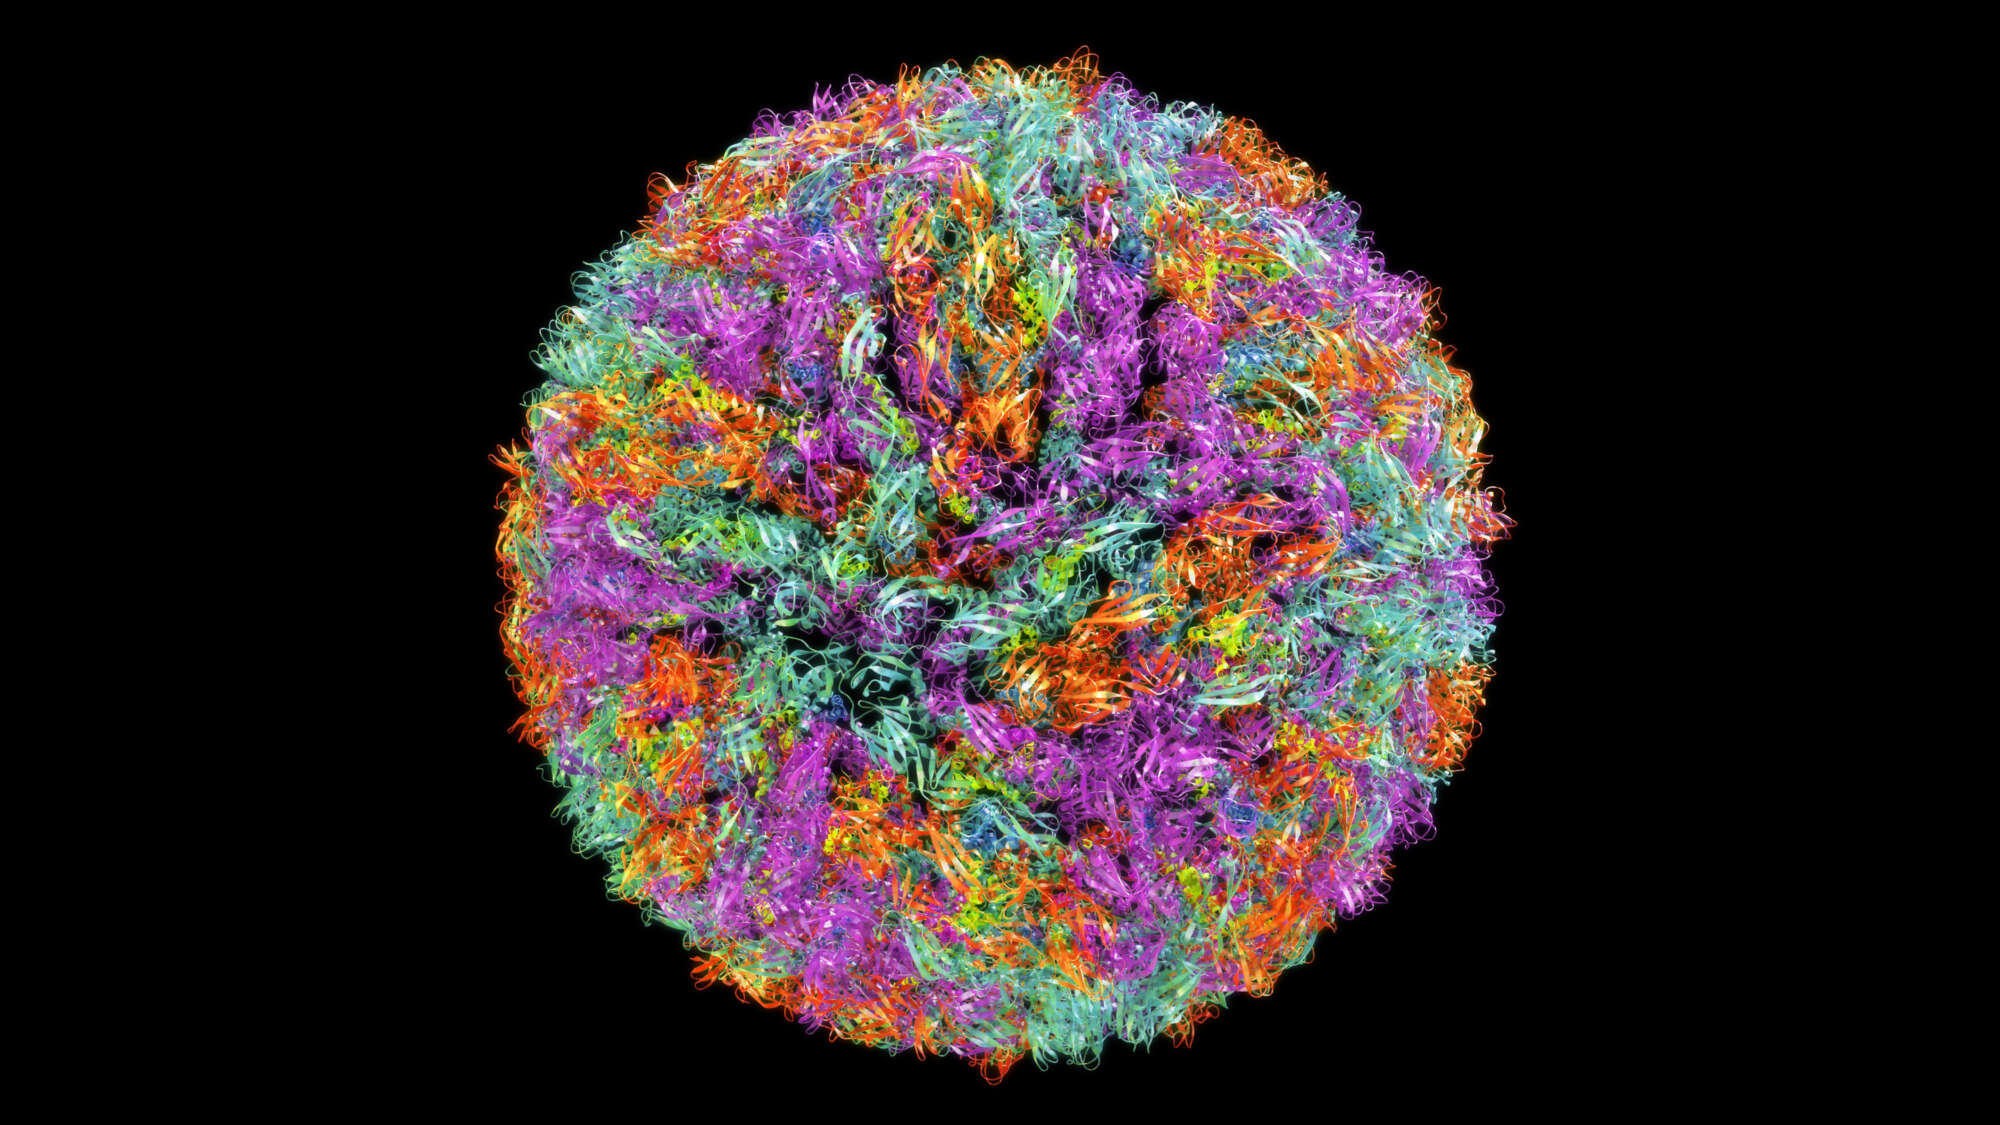 3D CG rendered image of scientifically accurate Zika Virus Envelope Structure based on PDB : 5IRE (ribbon style)